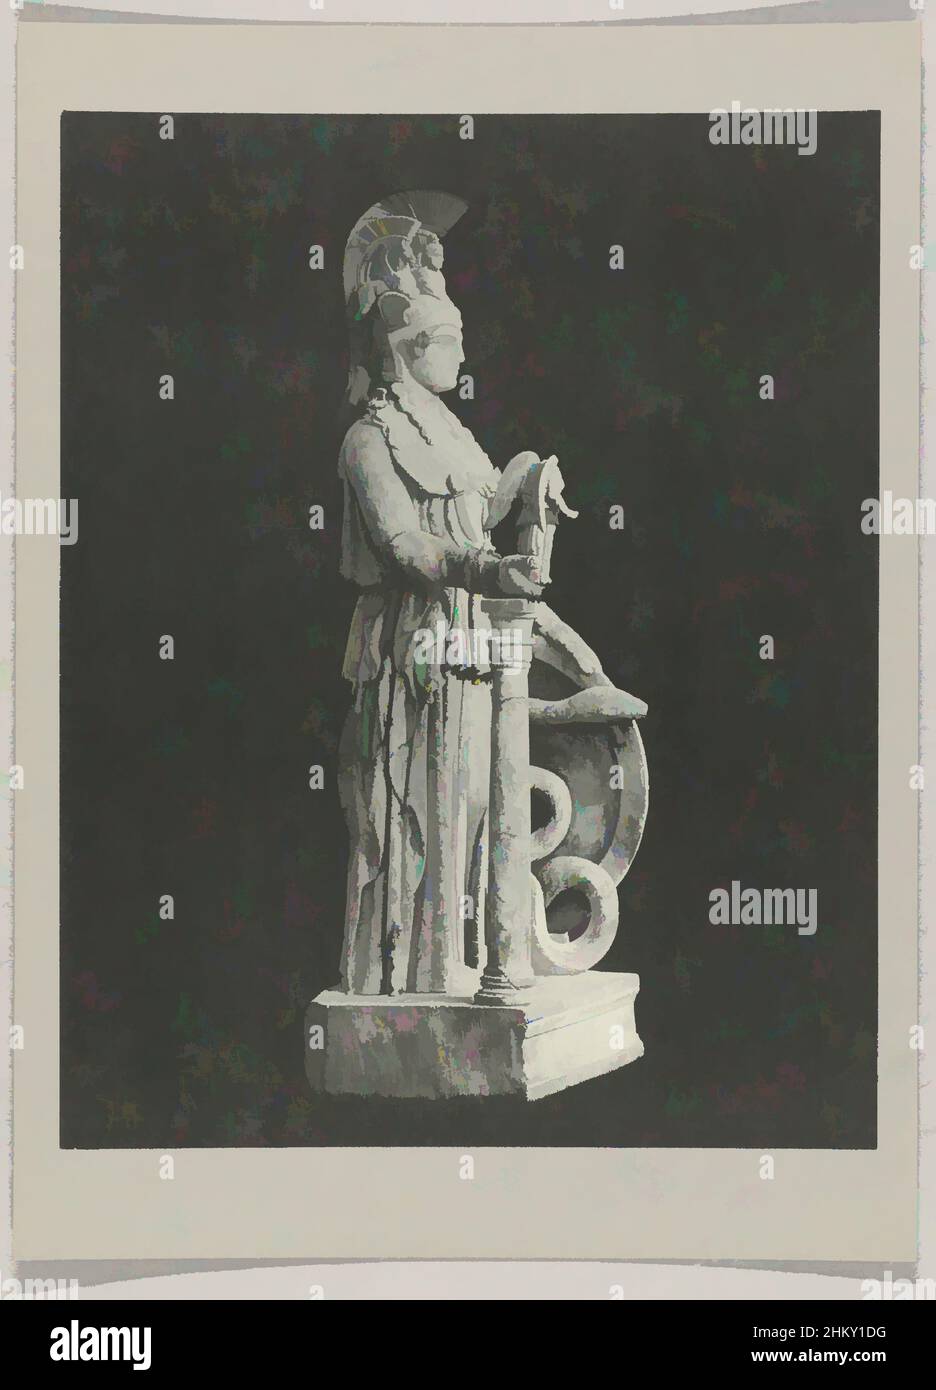 Art inspired by Statue of Pallas Athene129 Statuette of Athena Parthenos. N.M. Athens., Statue that stood in the center of the Parthenon., Athene, c. 1895 - c. 1915, paper, cardboard, collotype, height 274 mm × width 216 mmheight 328 mm × width 239 mm, Classic works modernized by Artotop with a splash of modernity. Shapes, color and value, eye-catching visual impact on art. Emotions through freedom of artworks in a contemporary way. A timeless message pursuing a wildly creative new direction. Artists turning to the digital medium and creating the Artotop NFT Stock Photo